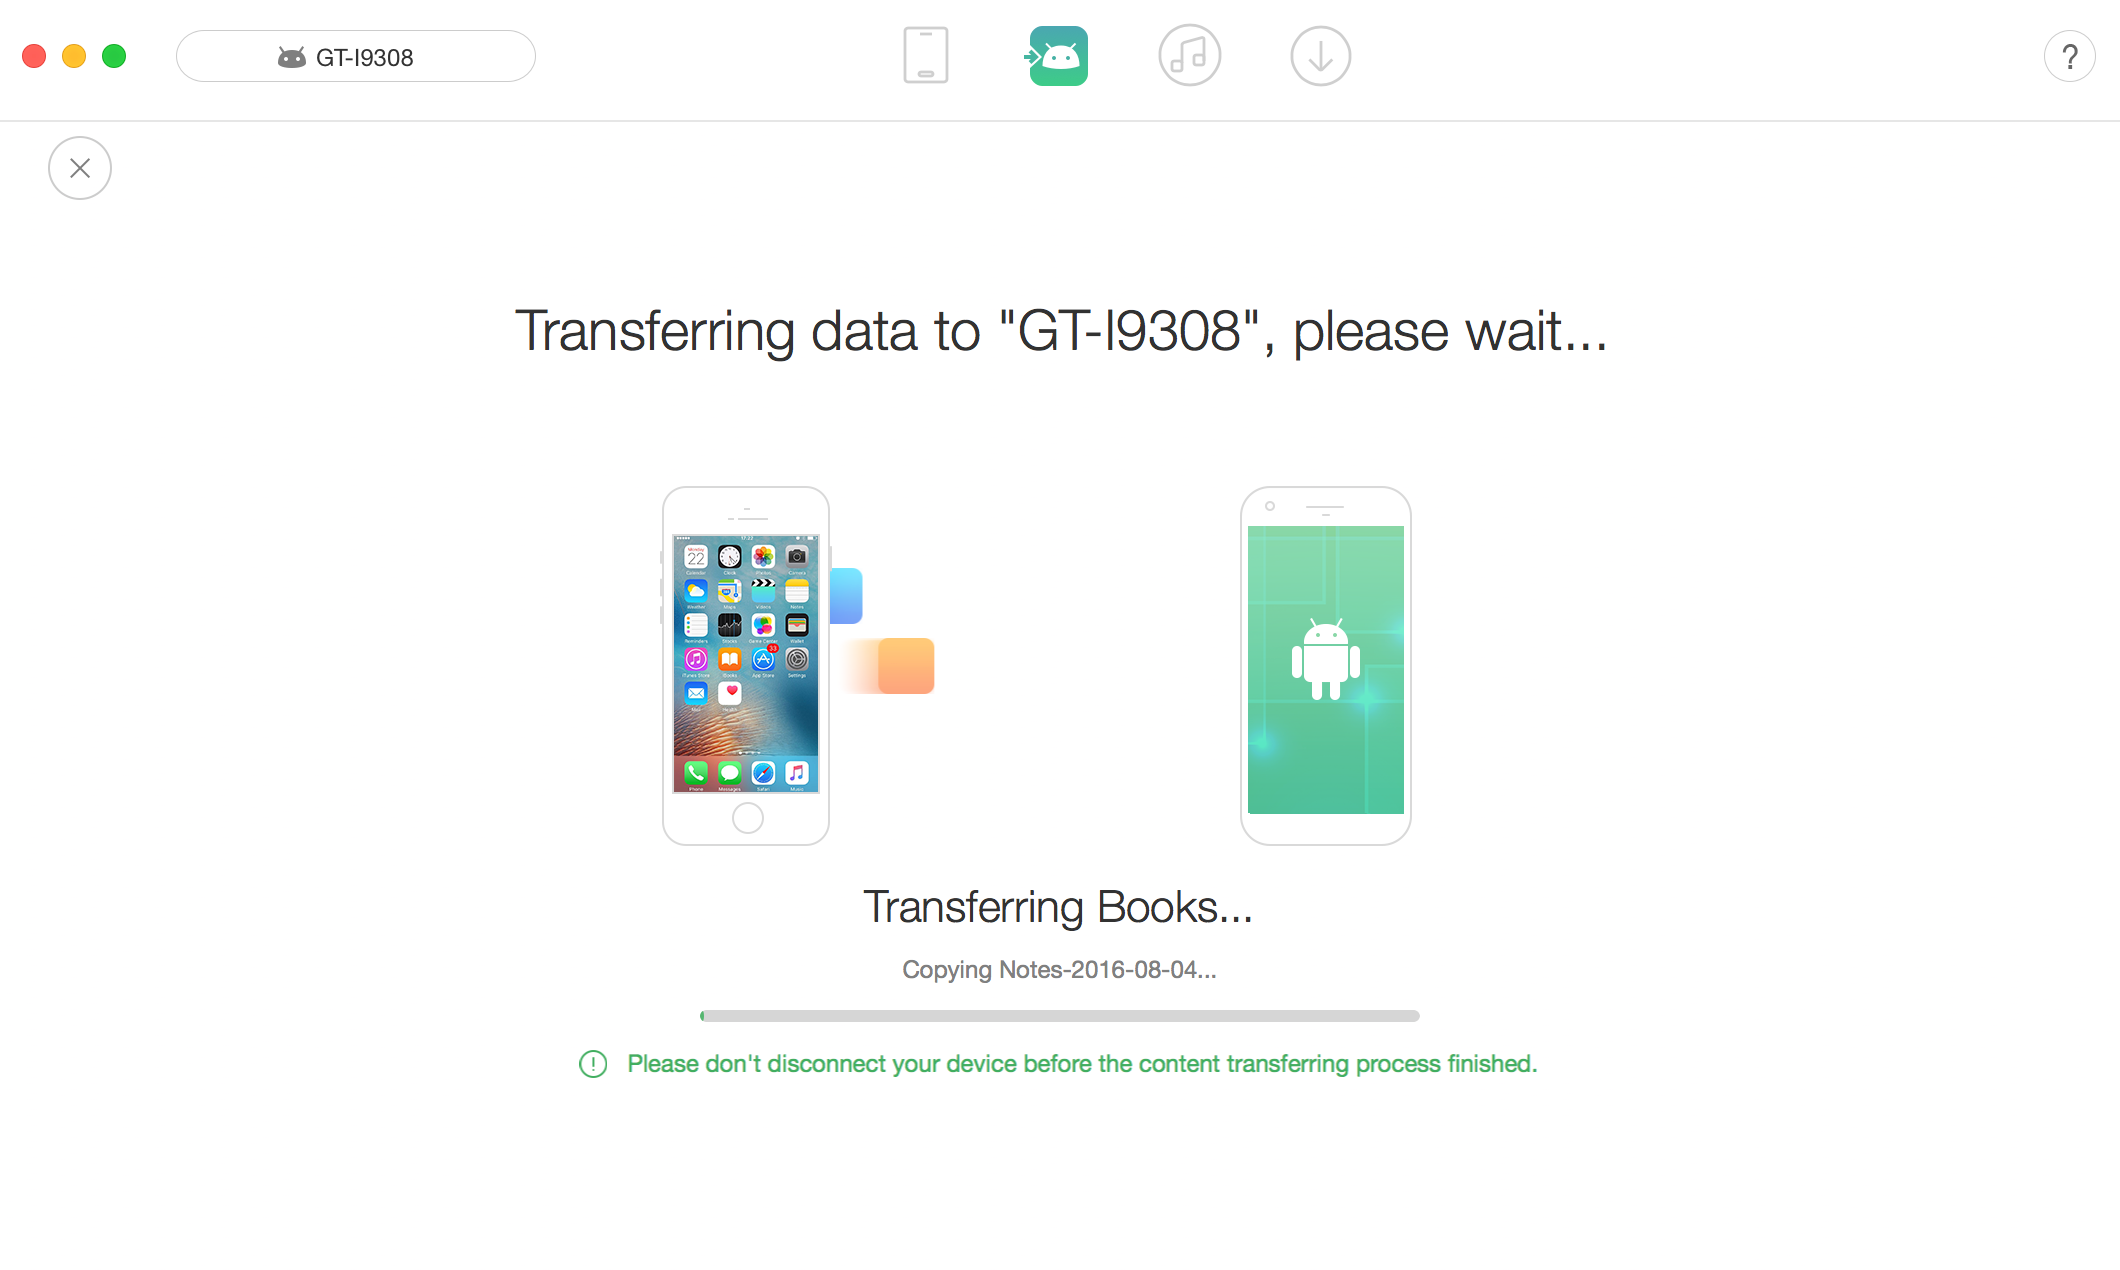 Transferring data from iOS device to Android Device